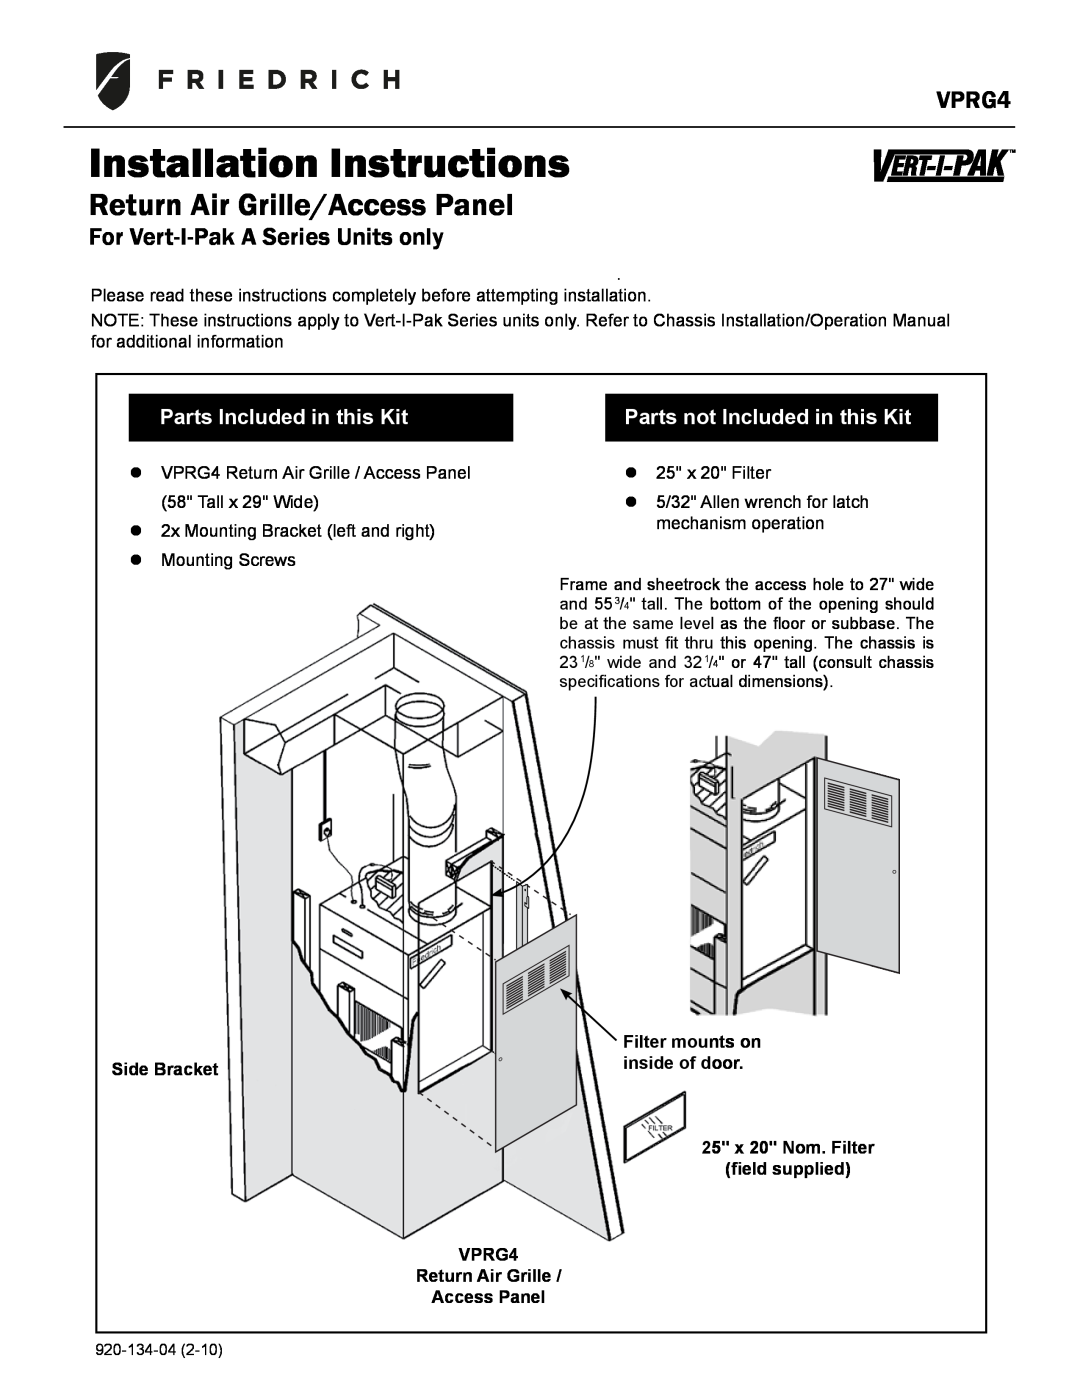 Friedrich VPRG4 Installation Instructions, Return Air Grille/Access Panel, For Vert-I-PakA Series Units only, Side Bracket 